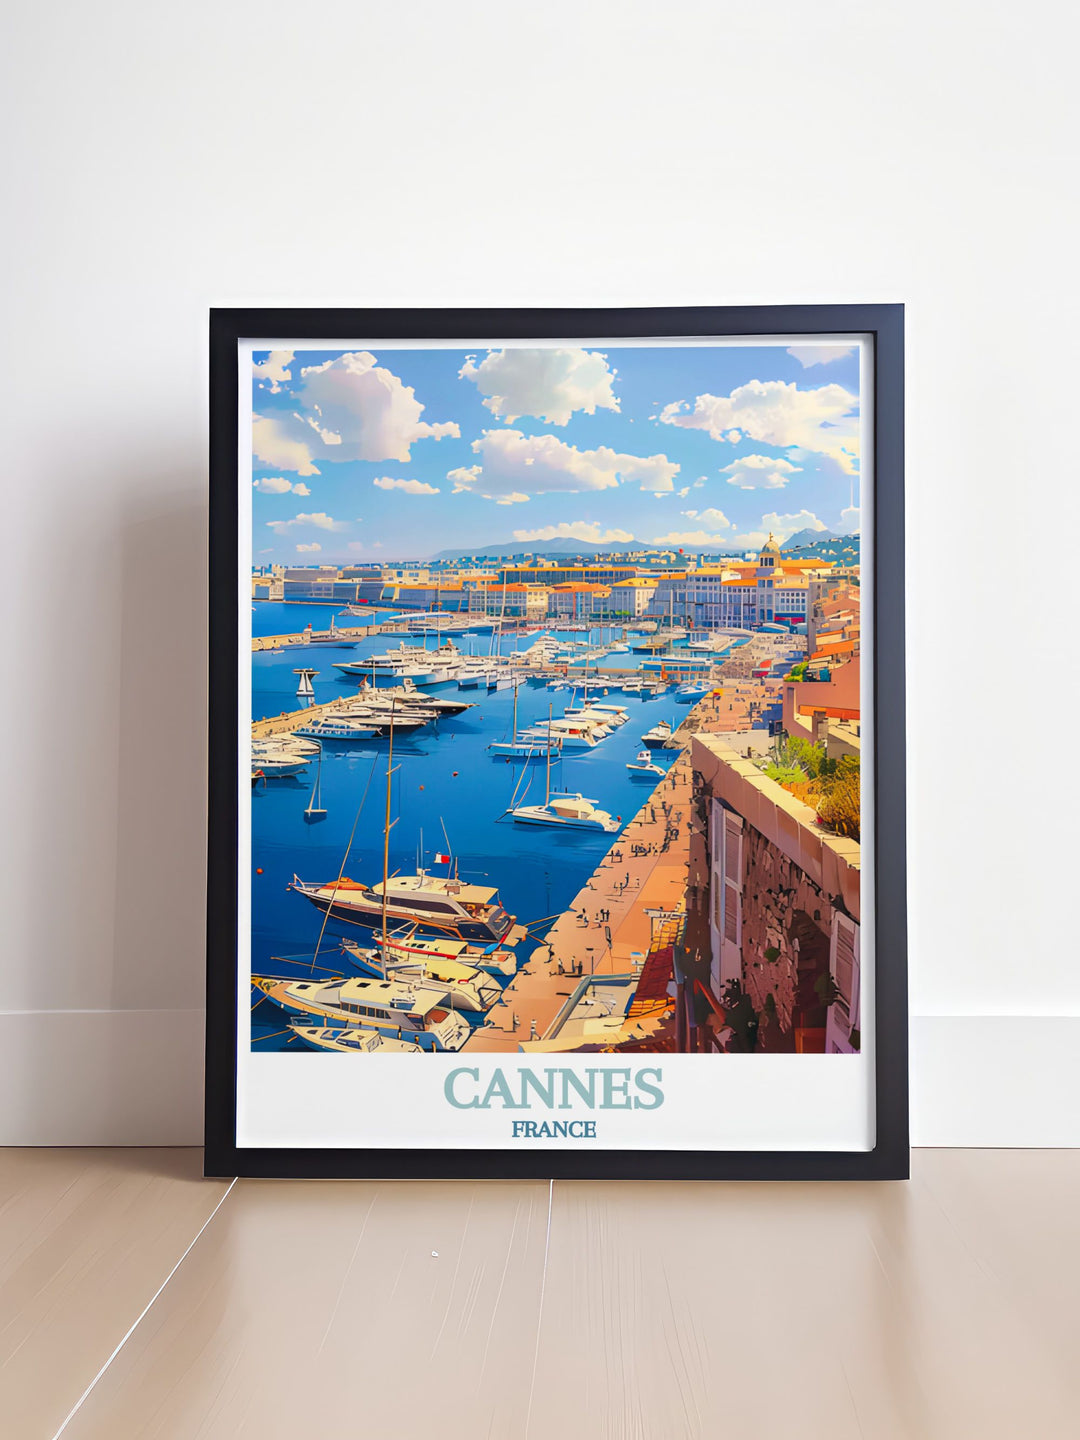 Exquisite Le Vieux Port travel poster showcasing the scenic beauty of Cannes ideal for adding sophistication to your home this France art print is perfect for those who love French culture and aesthetics a timeless piece for any art or travel collection